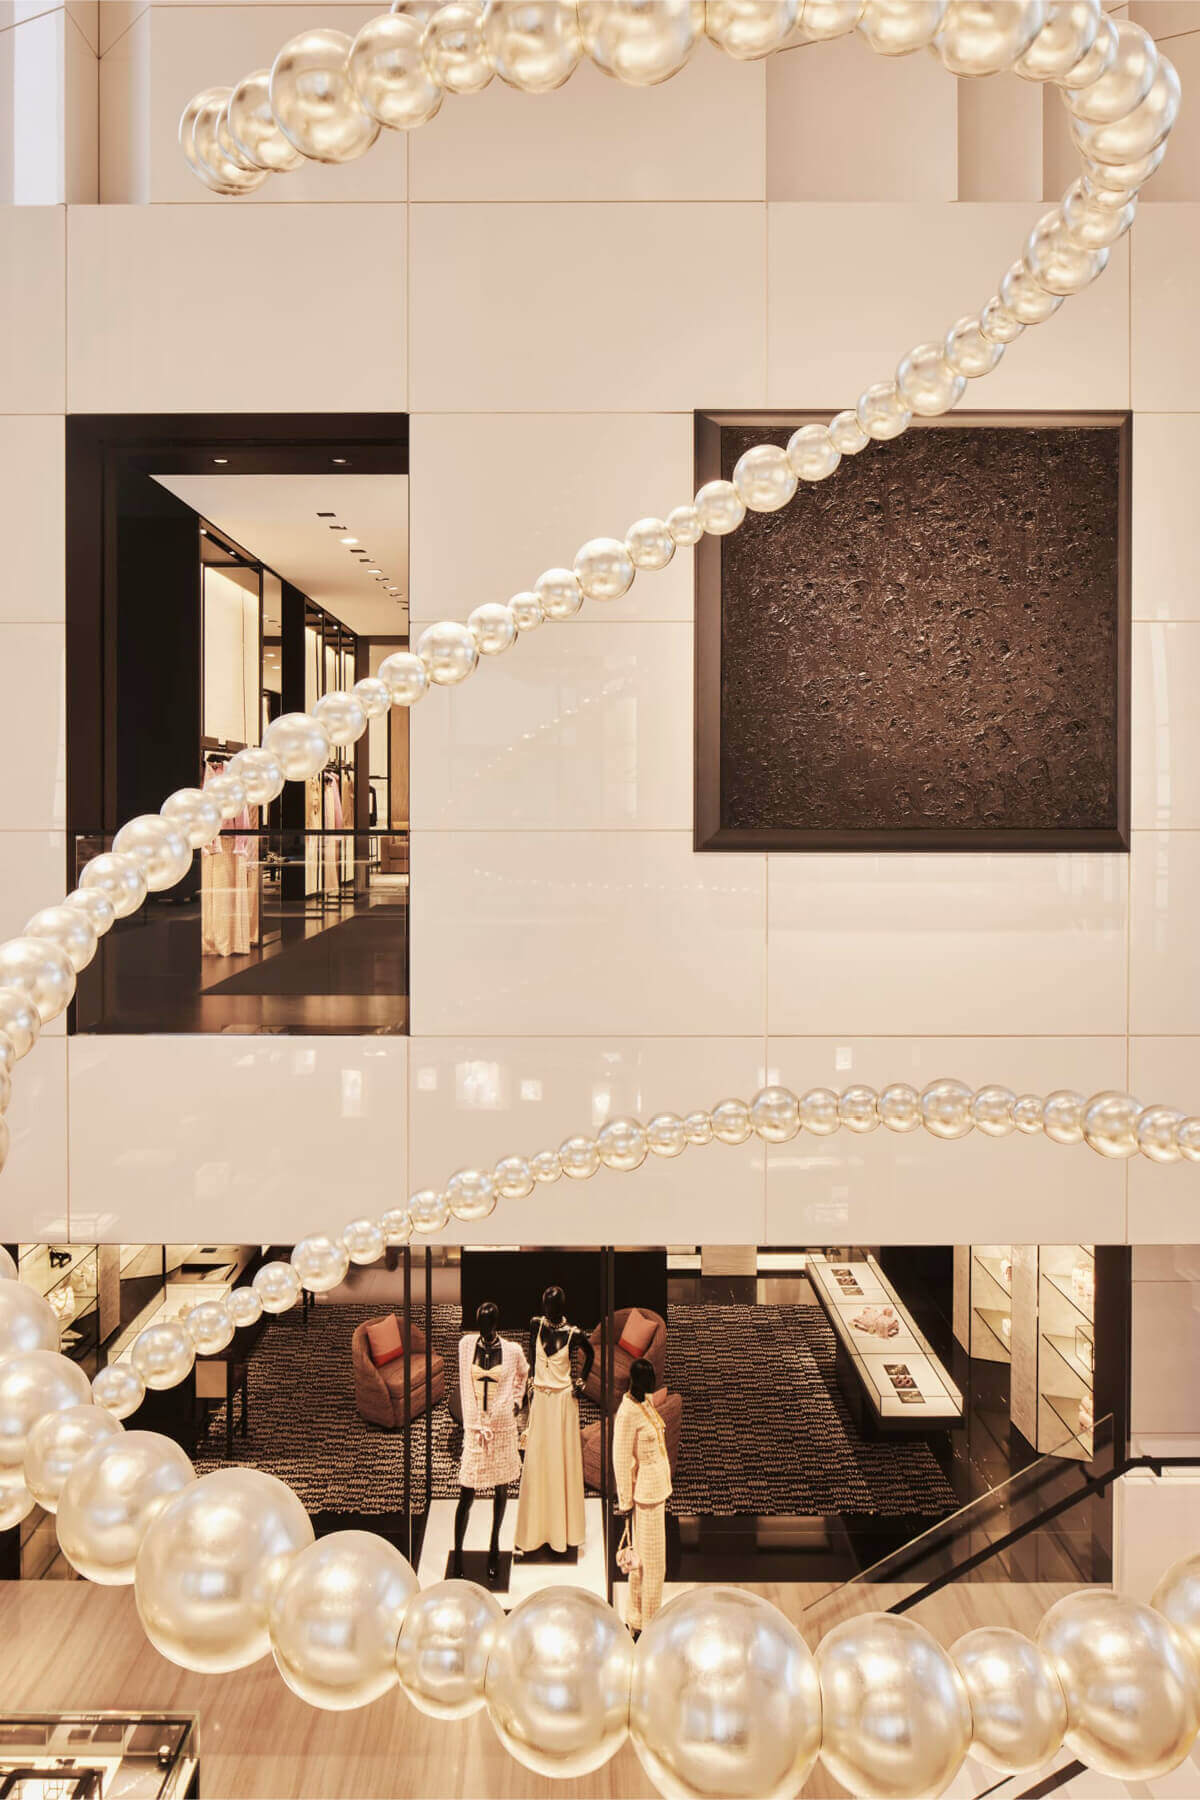 Please Lock Us in the Chanel Rodeo Drive Boutique Overnight - 10 Magazine  USA